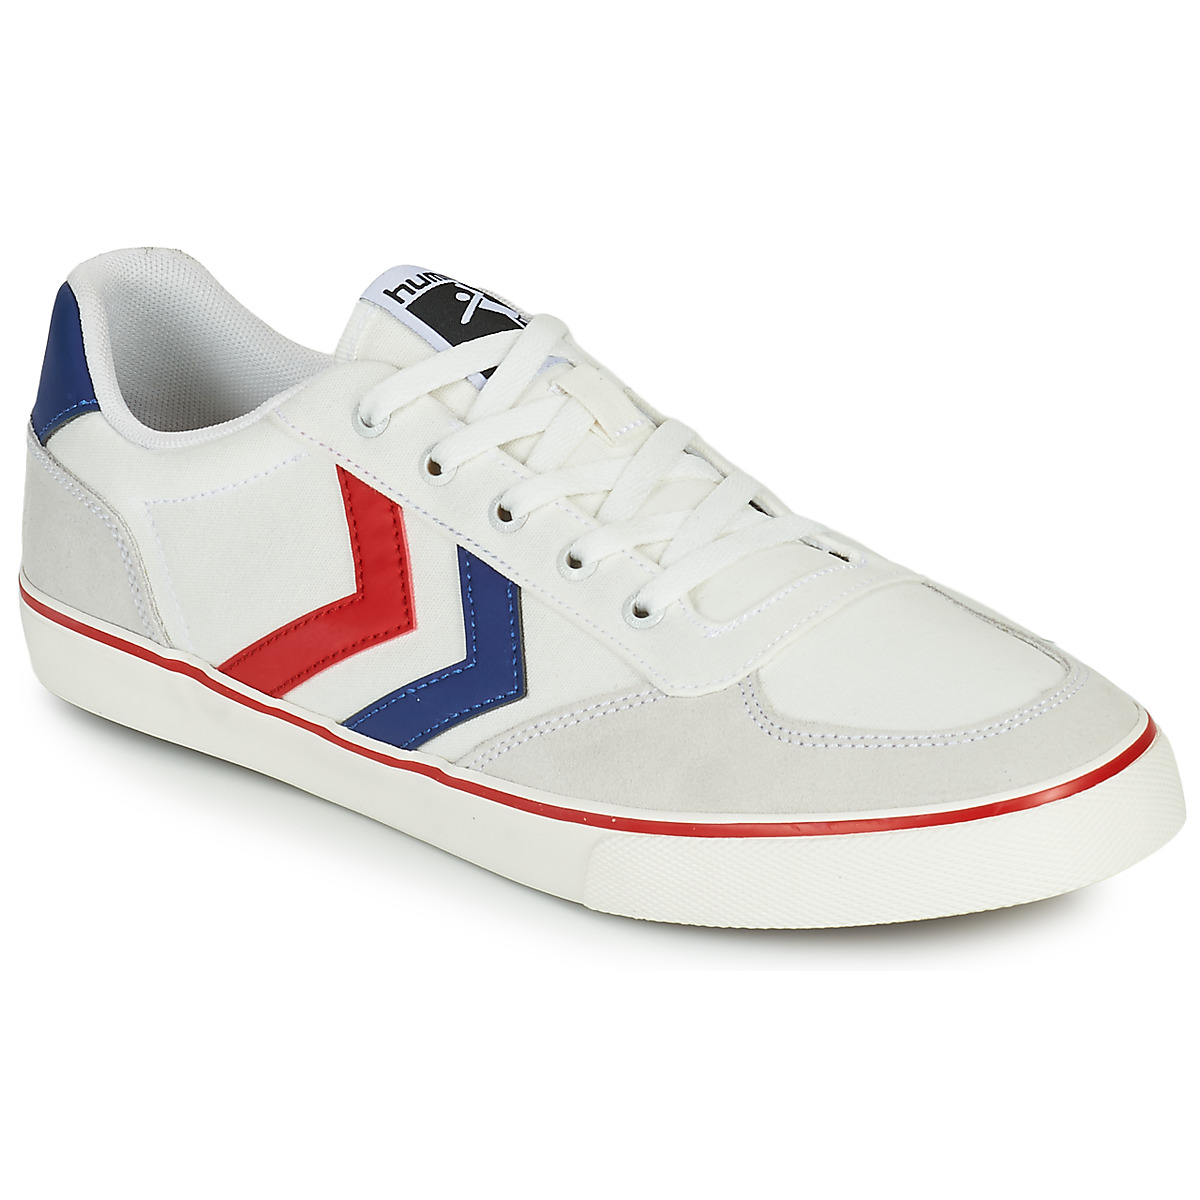 Chaussures Homme Oh My Sandals STADIL LOW OGC 3.0 Blanc / Bleu / Rouge